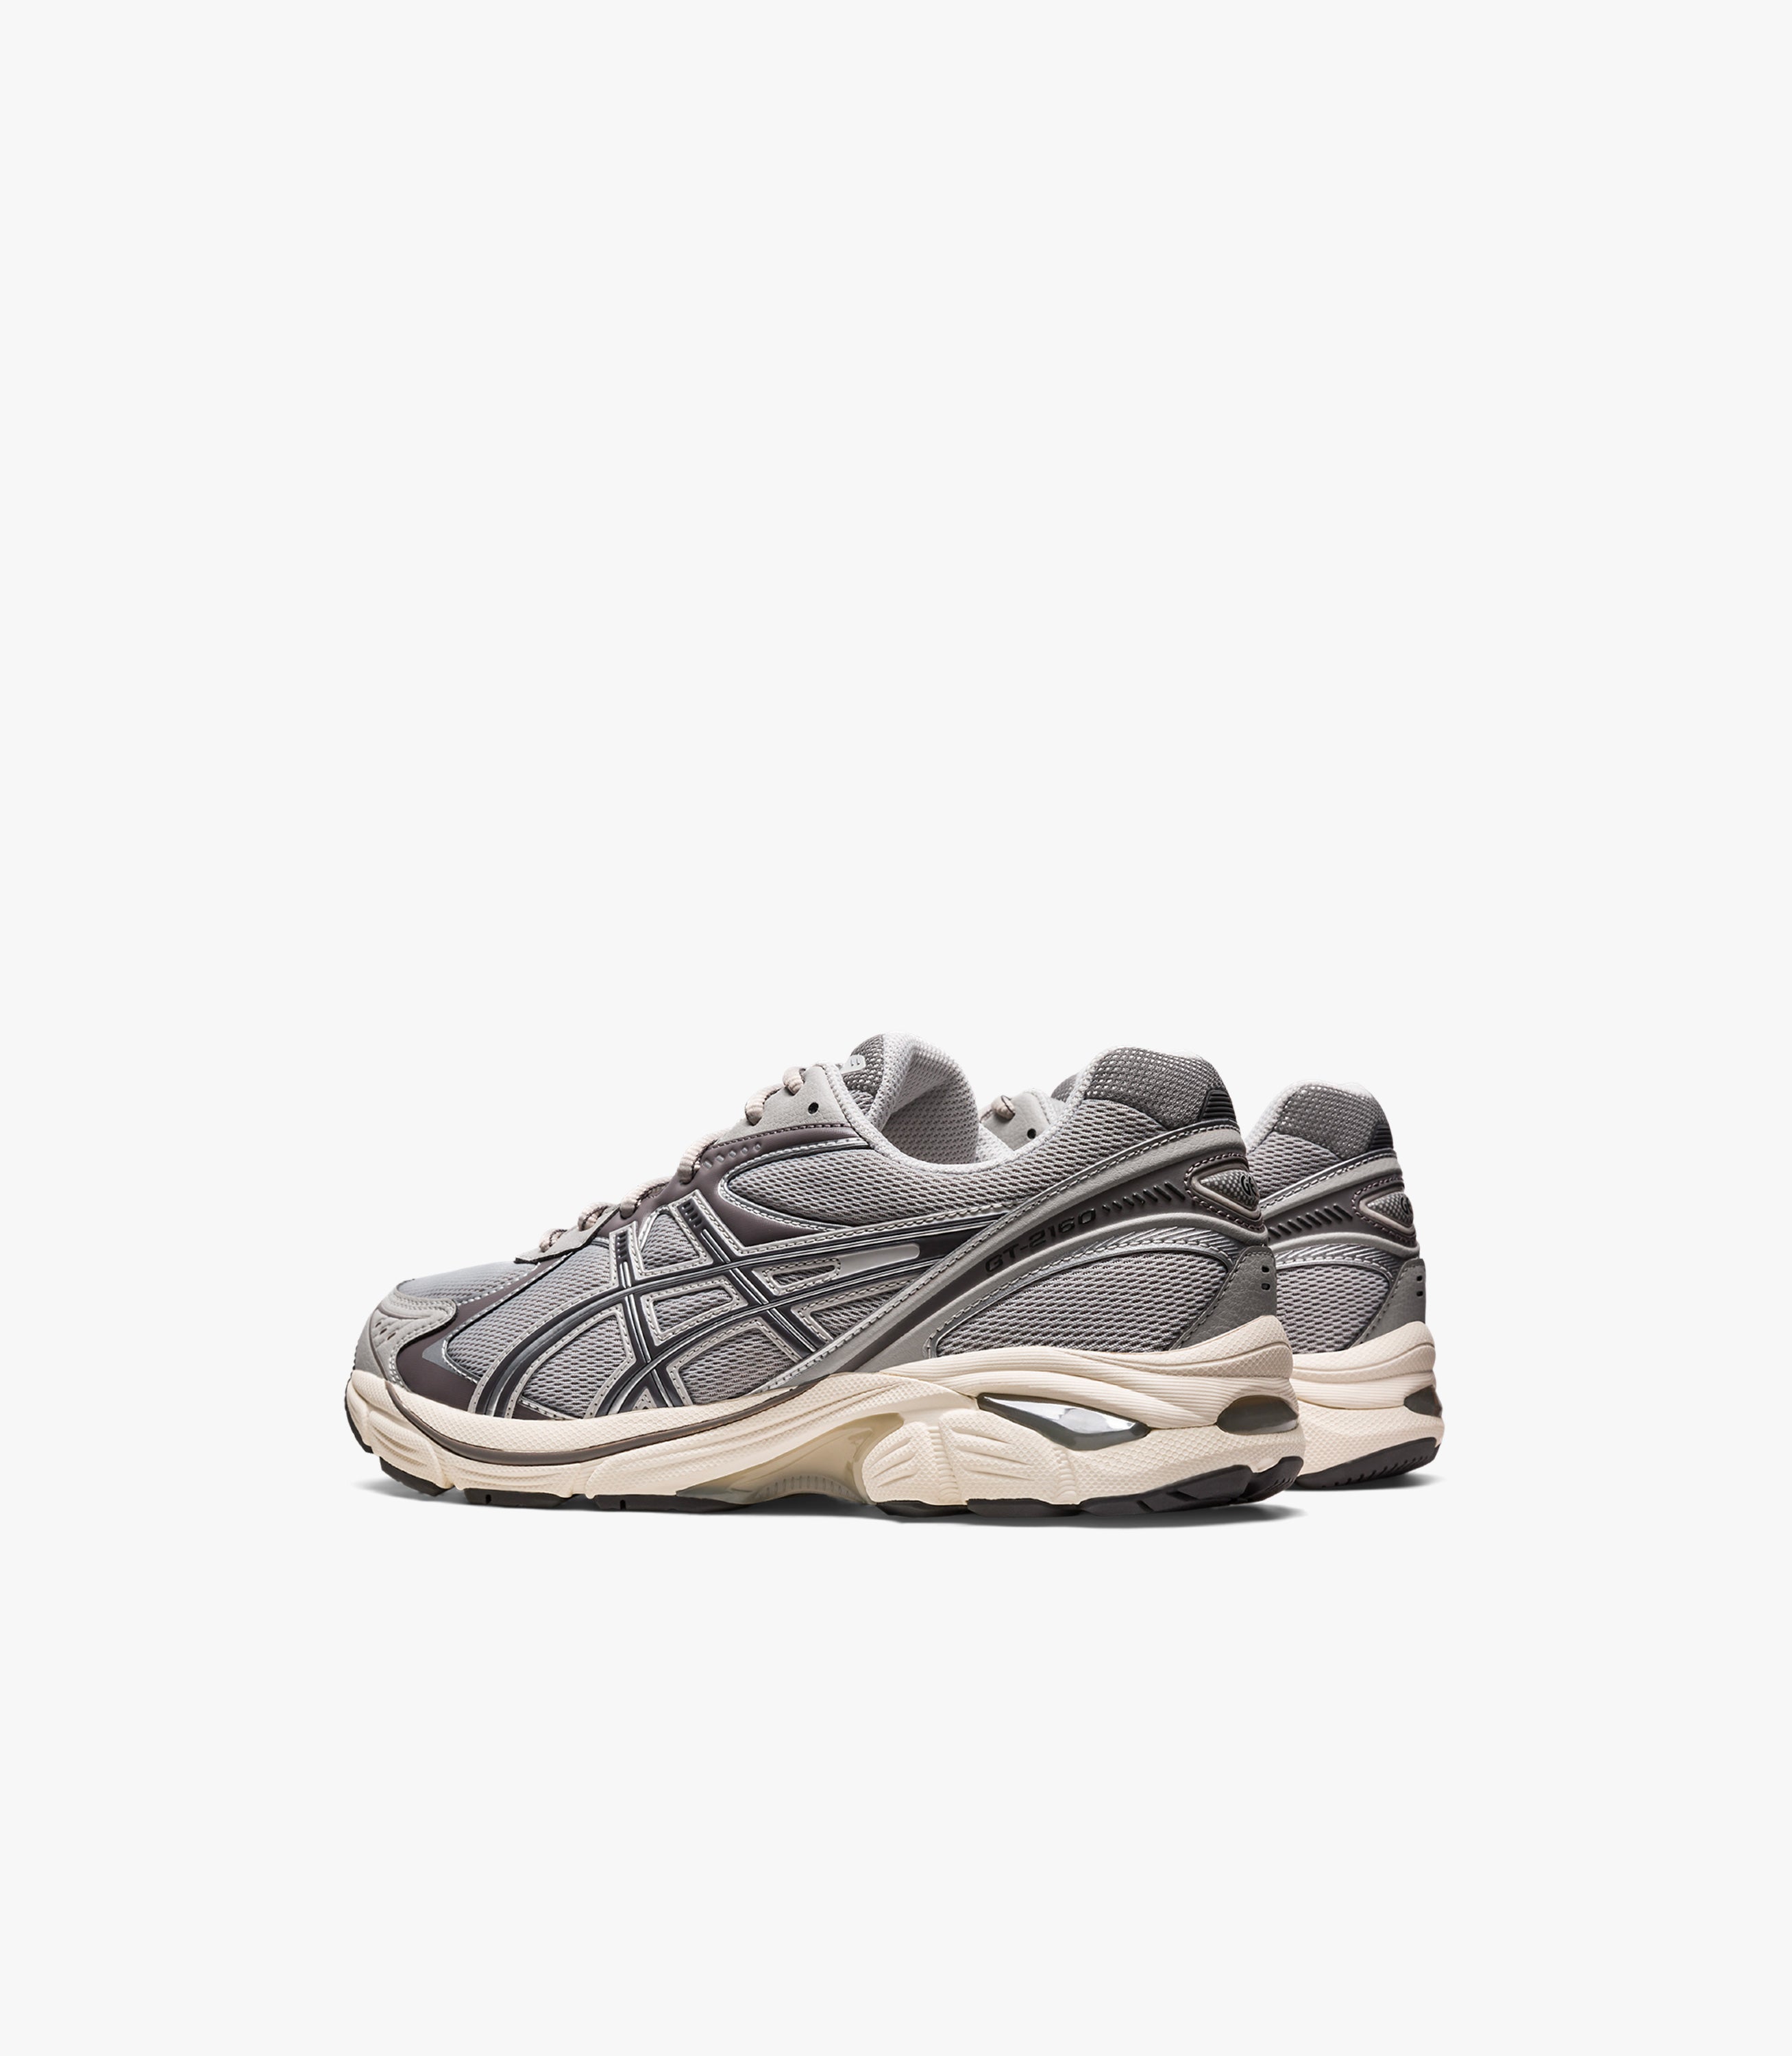 sneaker asics gt 2160 oyster grey carbon 3